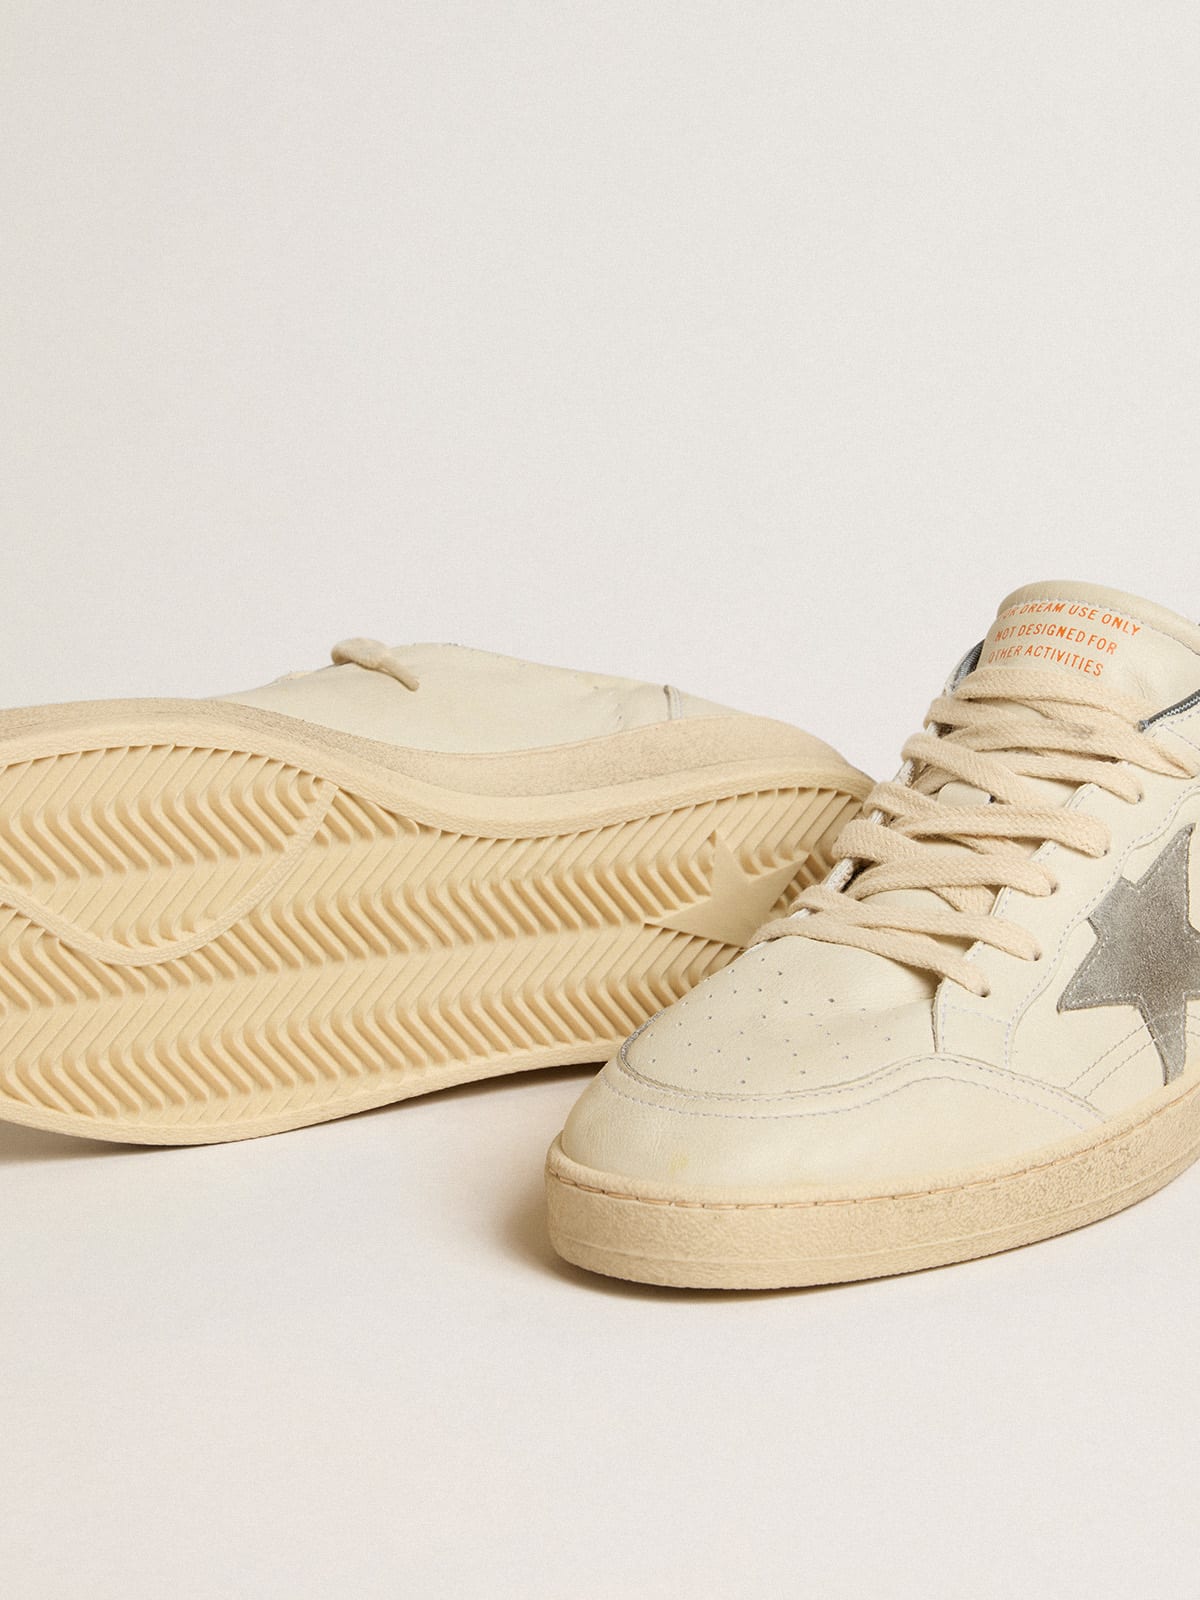 Golden Goose - Ball Star in nappa leather with gray suede star and heel tab in 